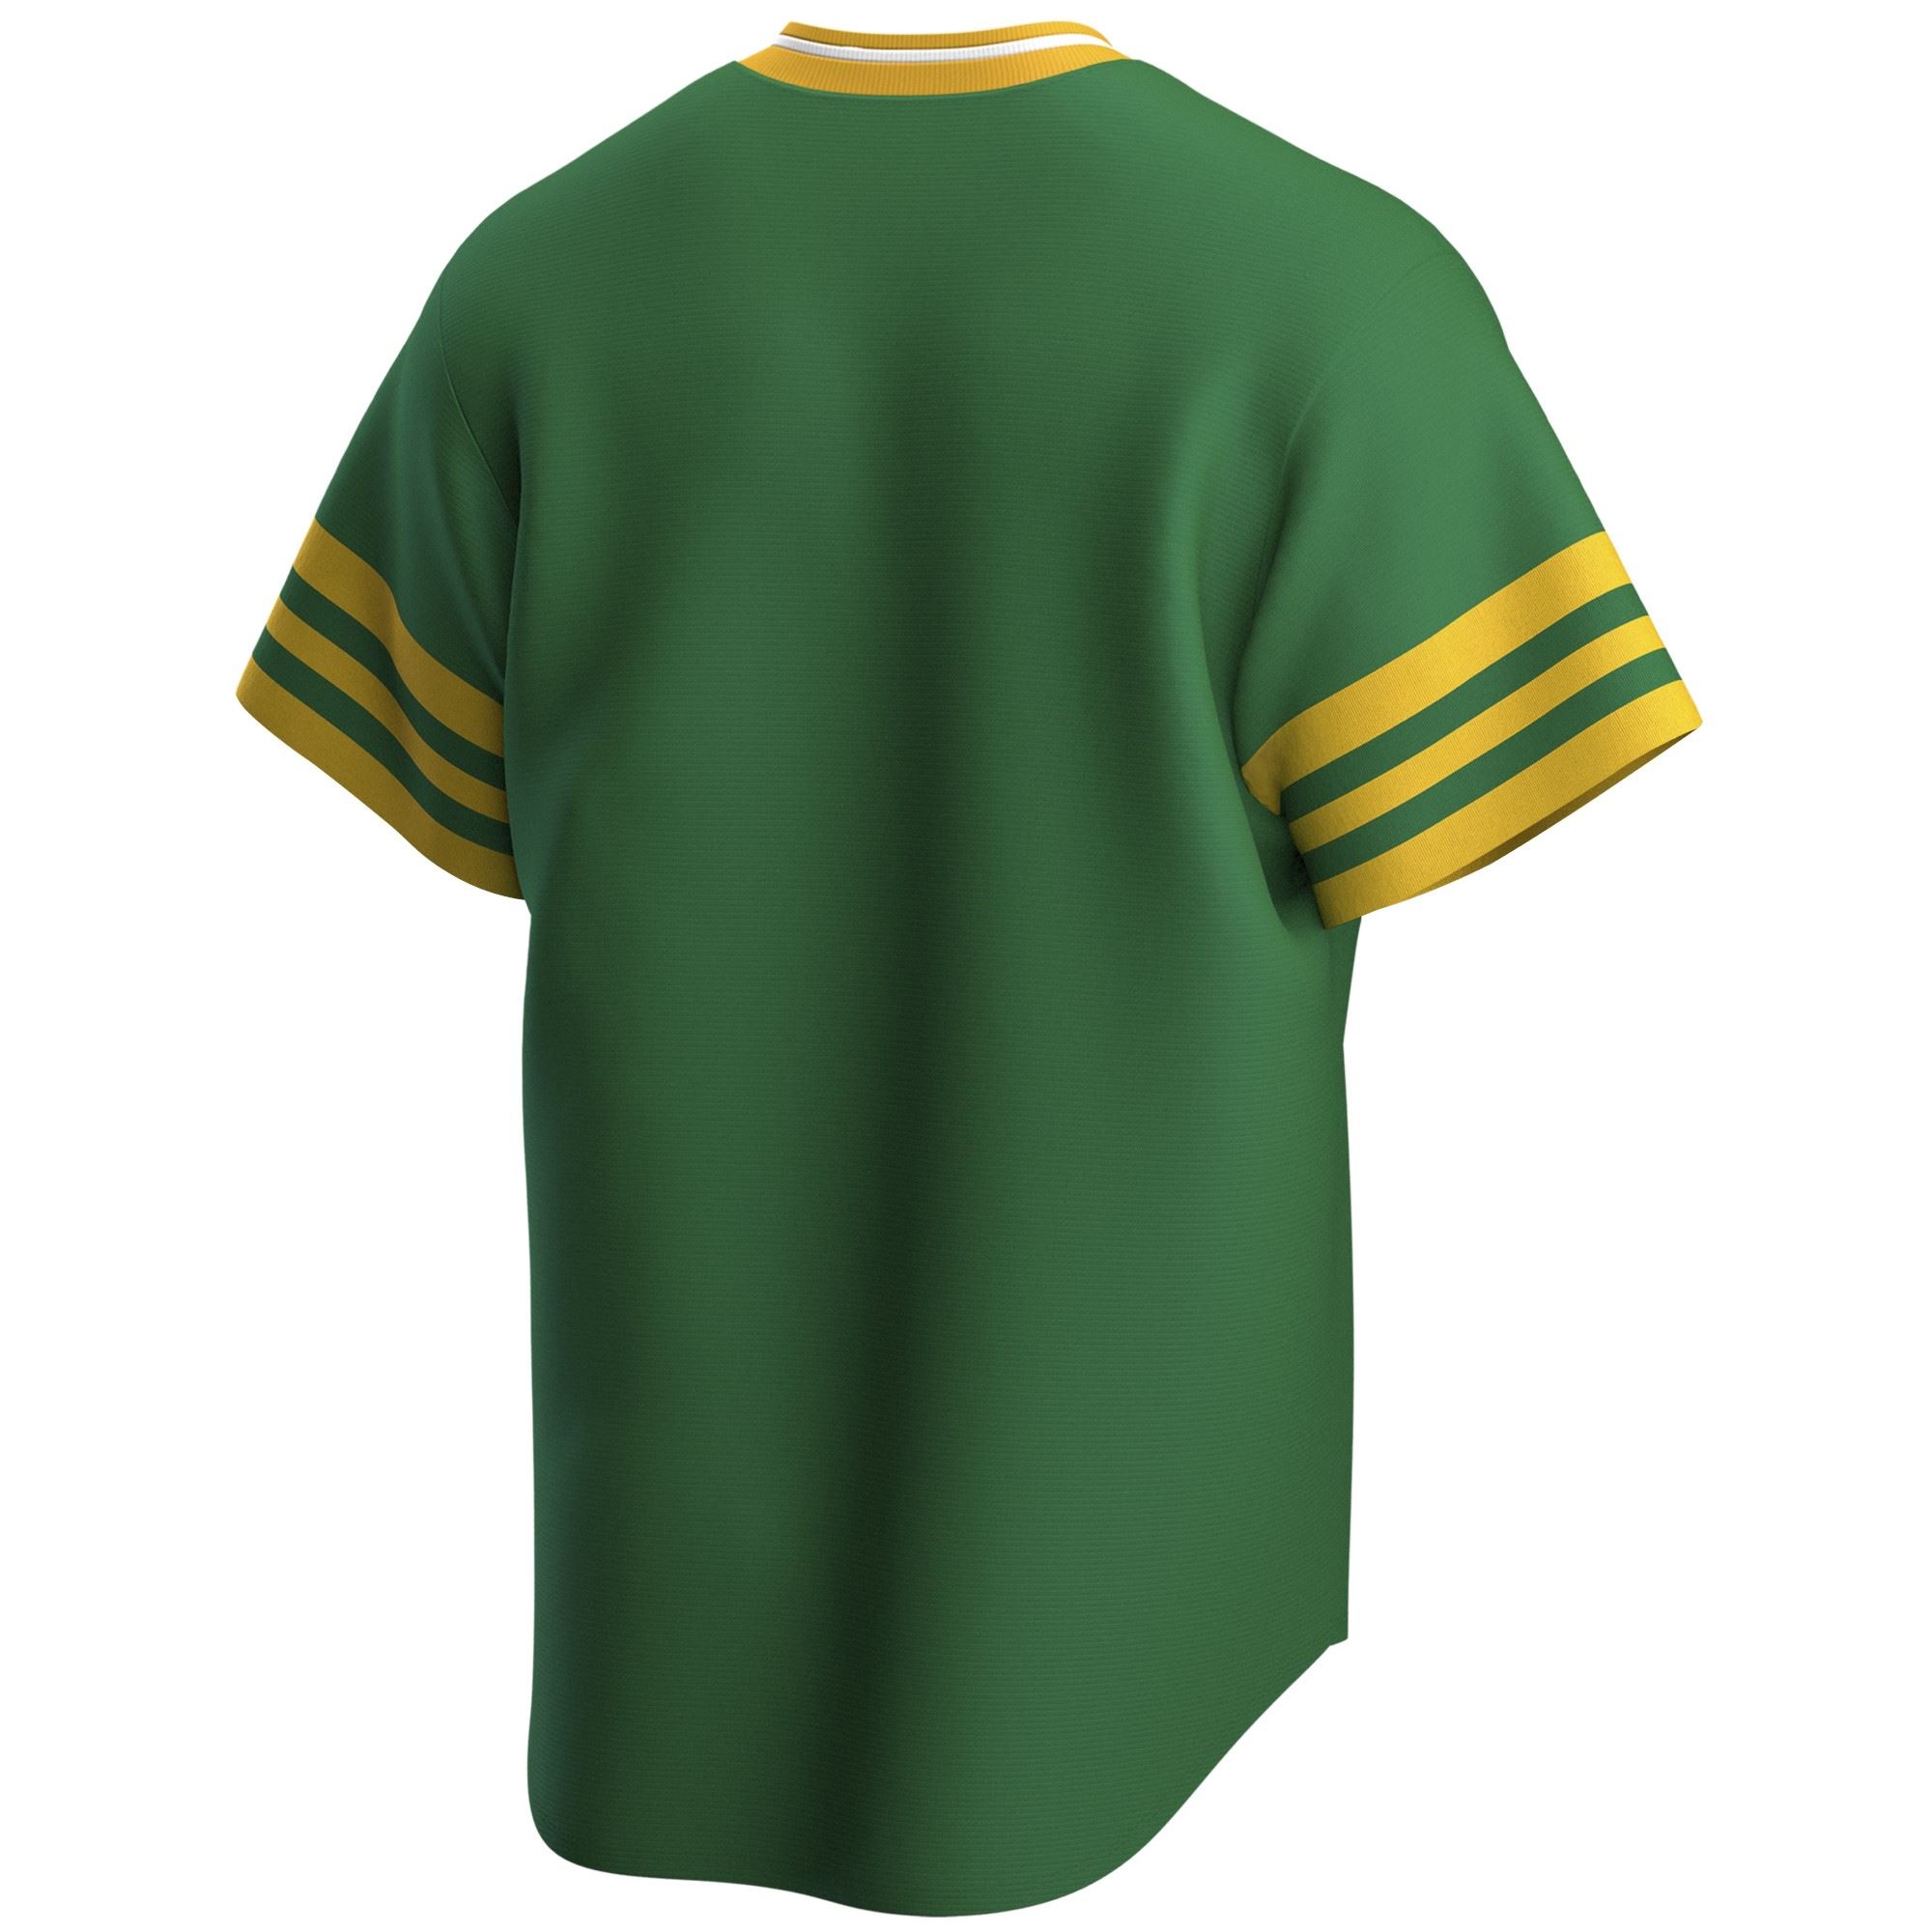 Oakland Athletics Official MLB Cooperstown Jersey Green Nike